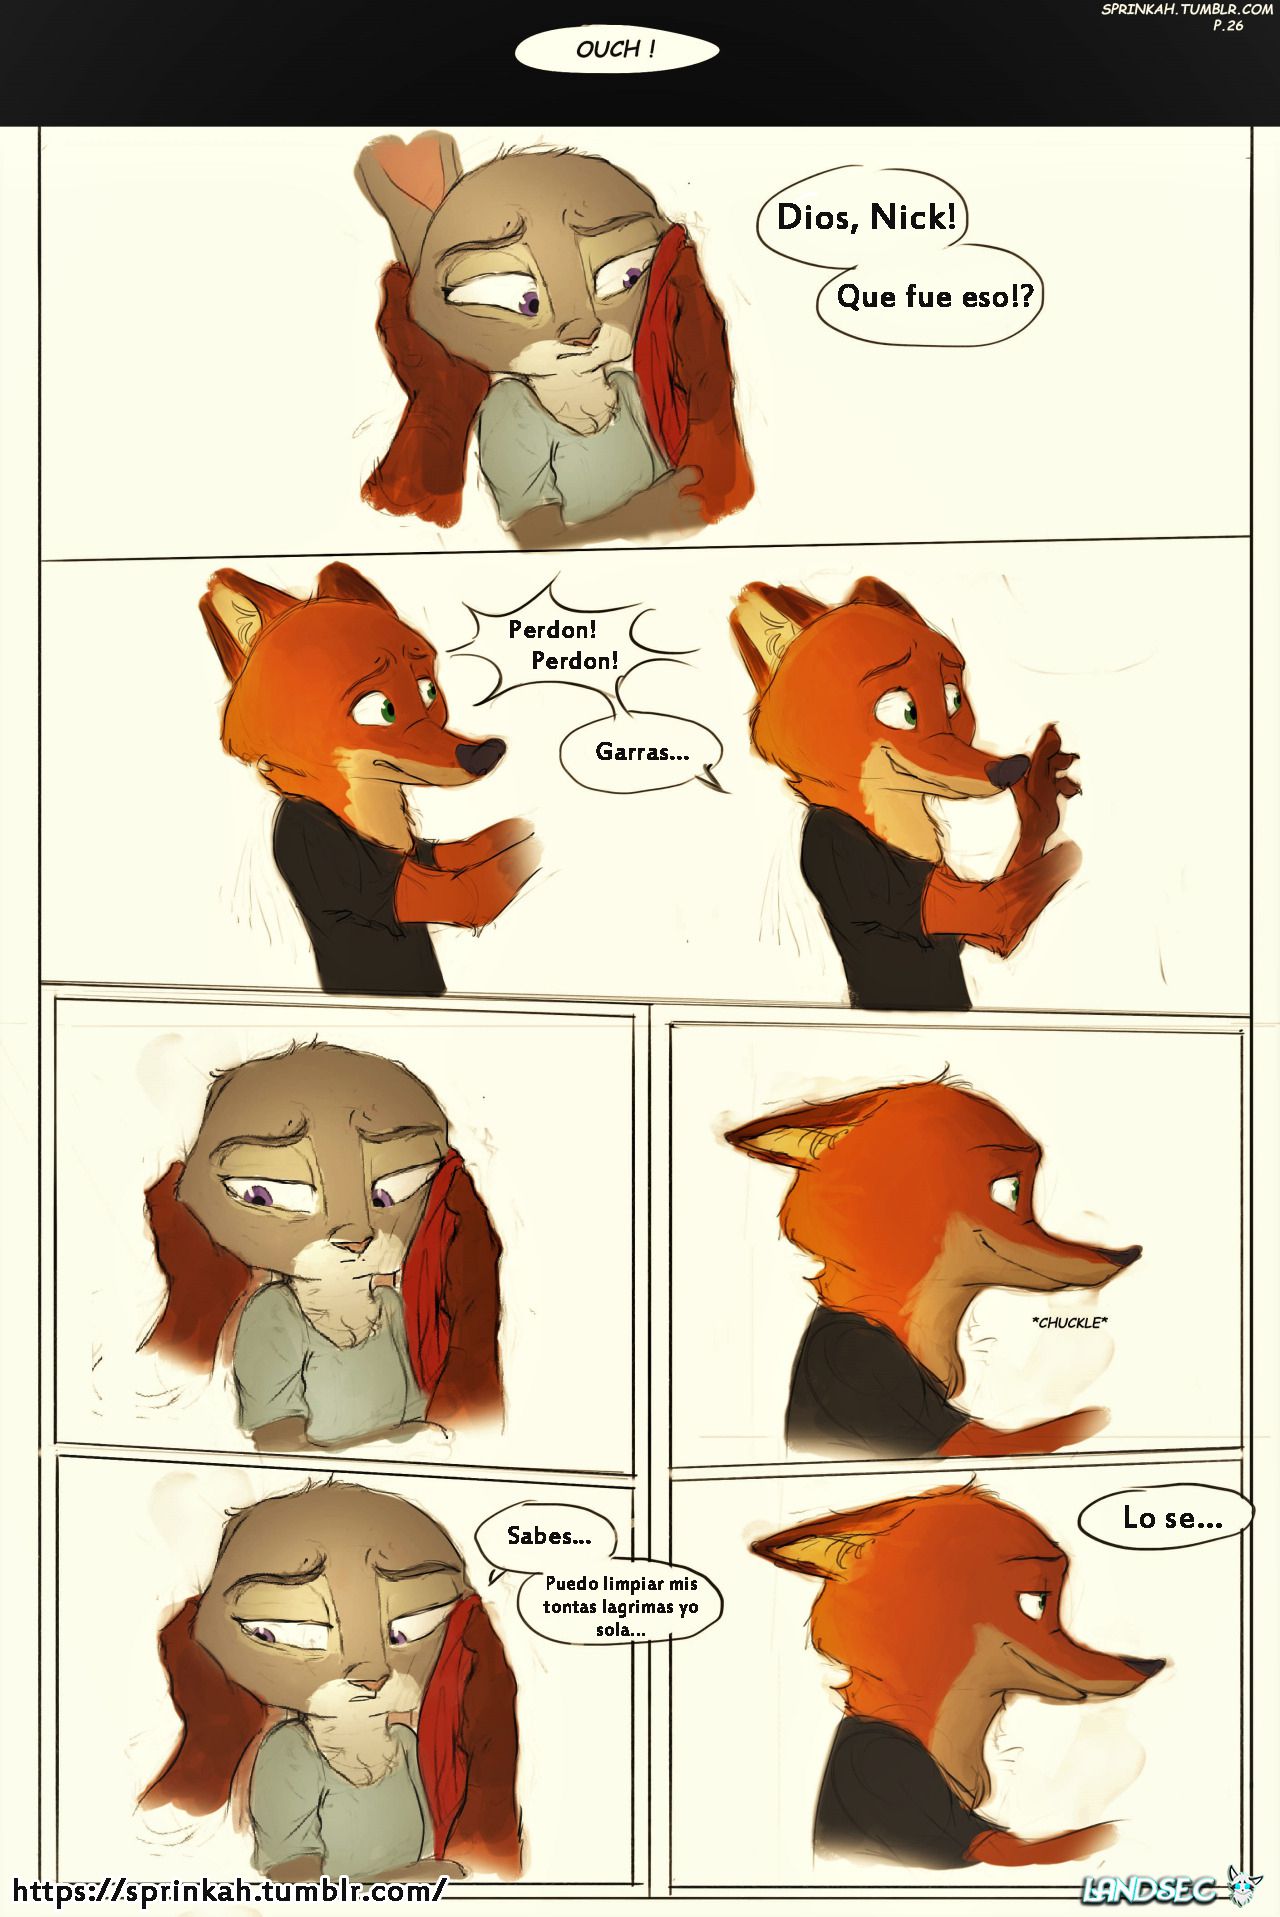 [Sprinkah] This is what true love looks like (Zootopia) (Spanish) (On Going) [Landsec] http://sprinkah.tumblr.com/ 38